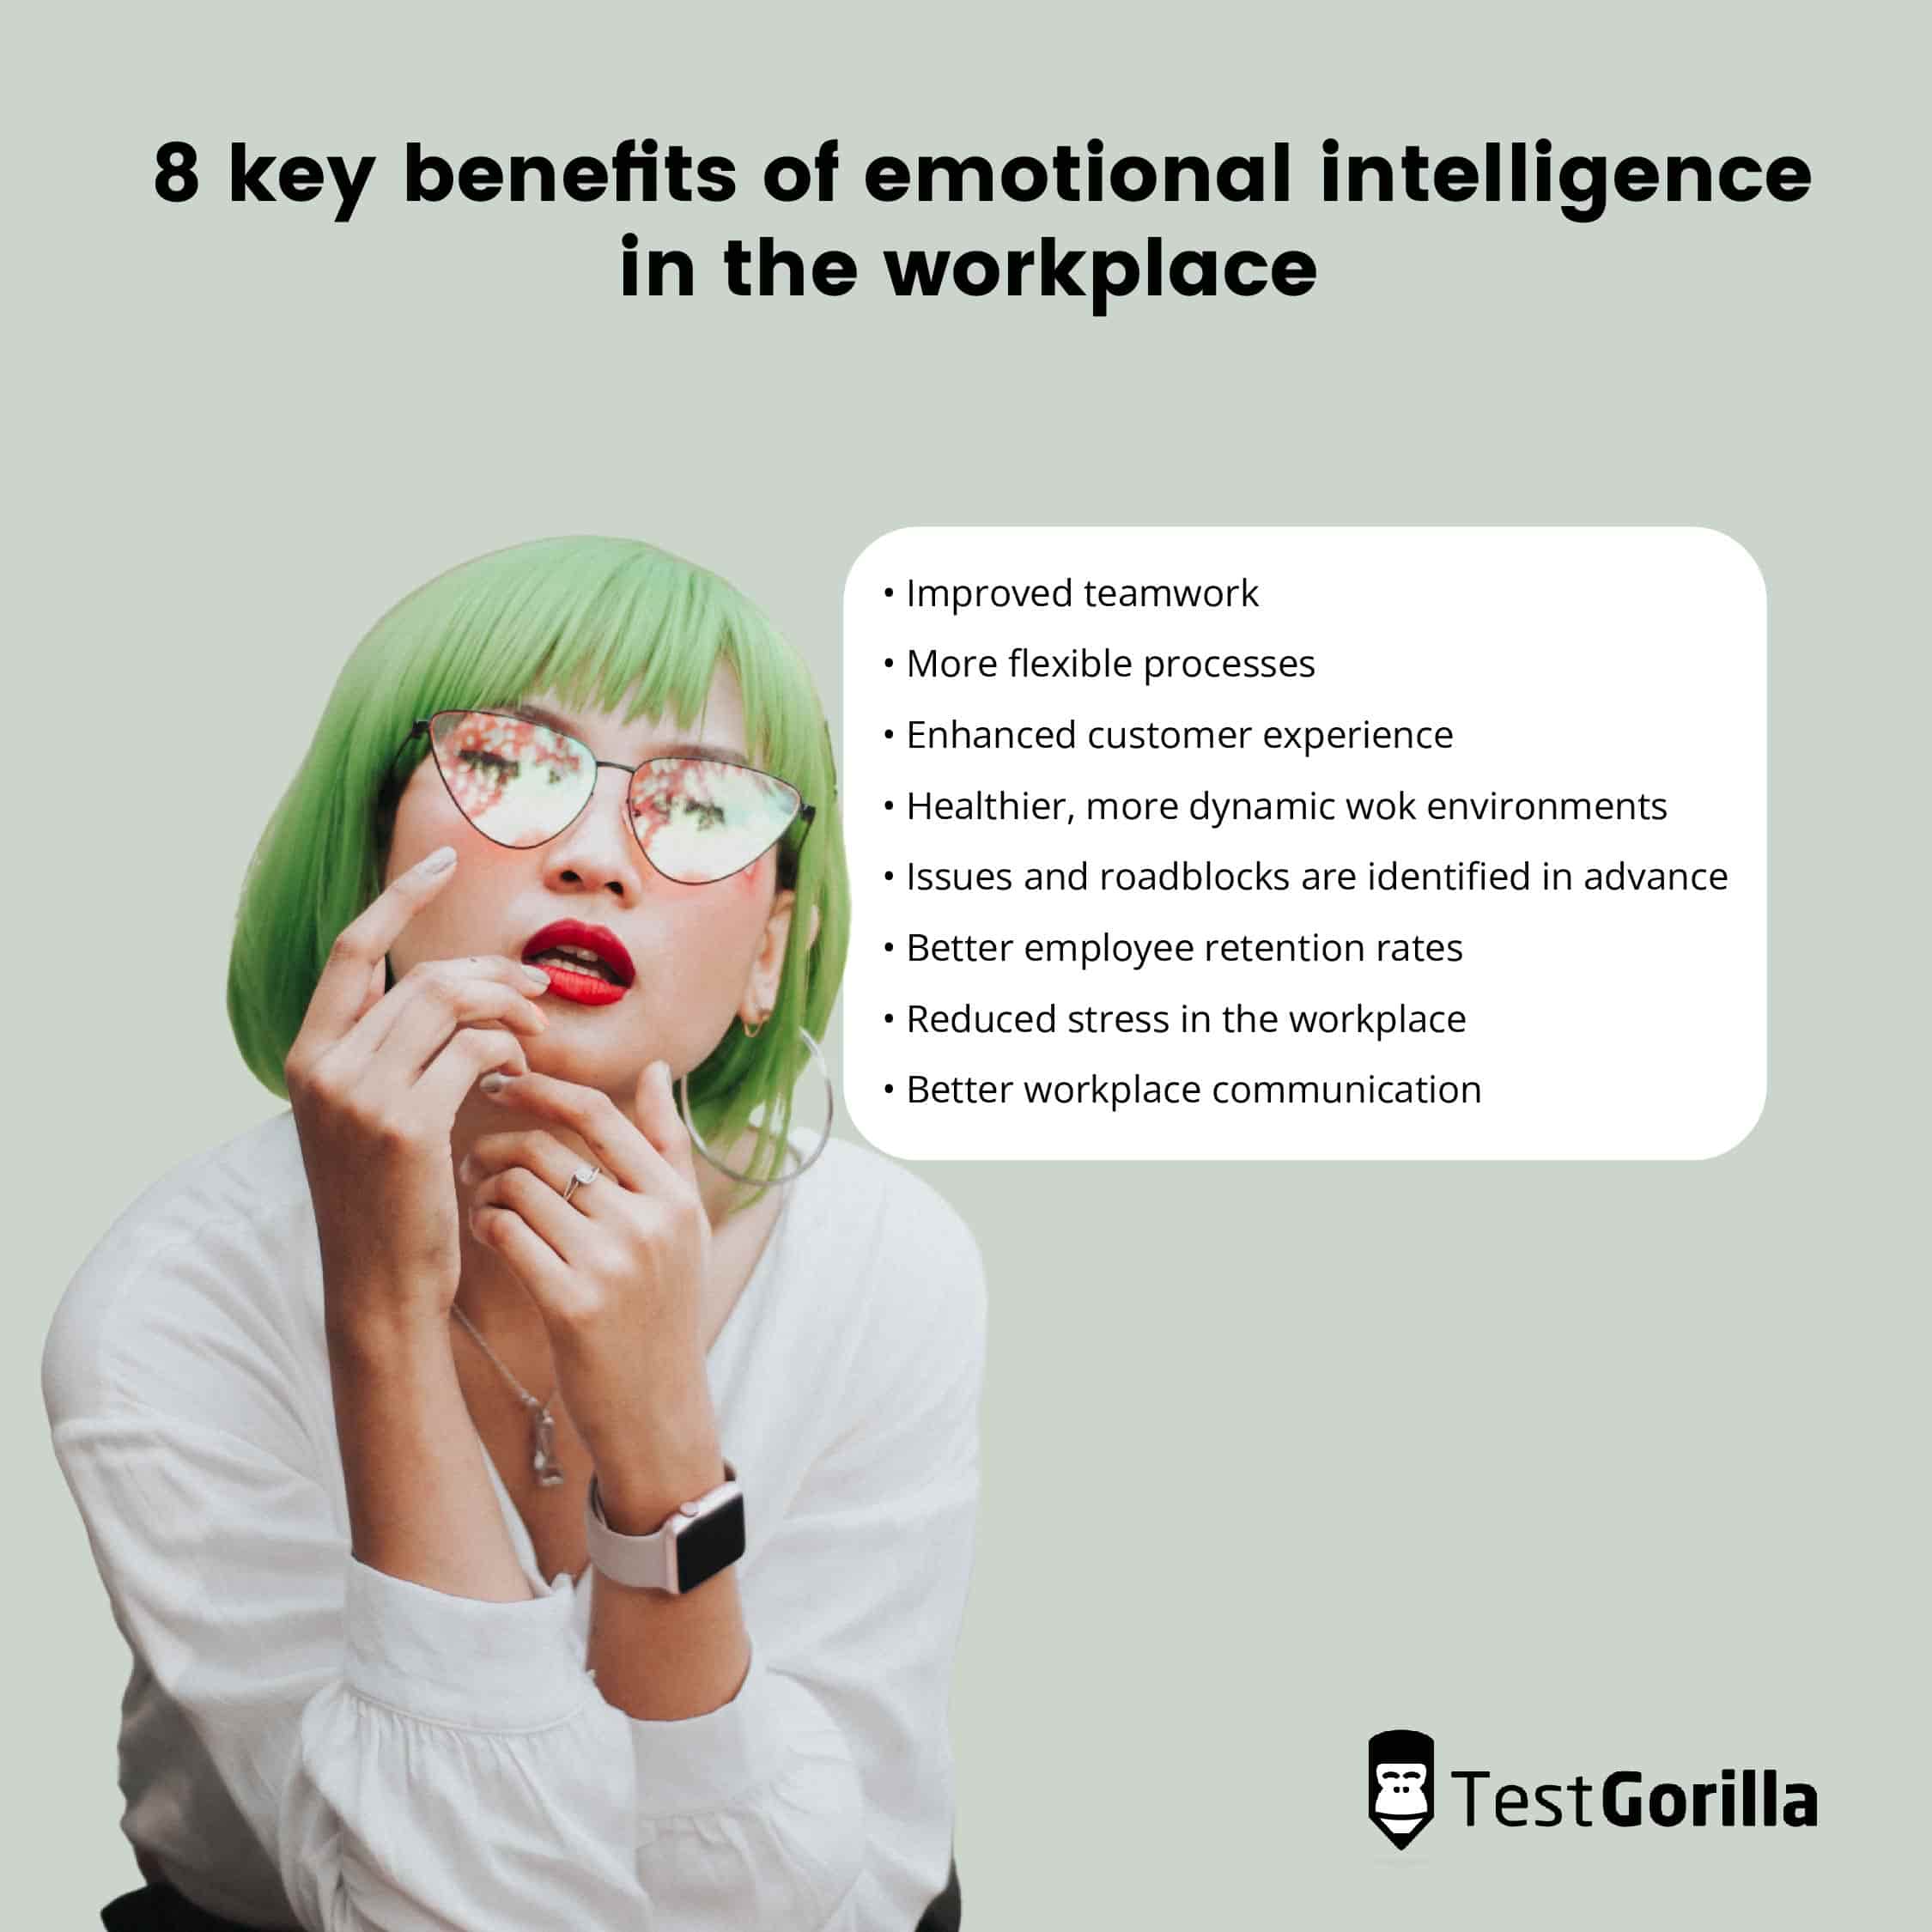 8 key benefits of emotional intelligence in the workplace